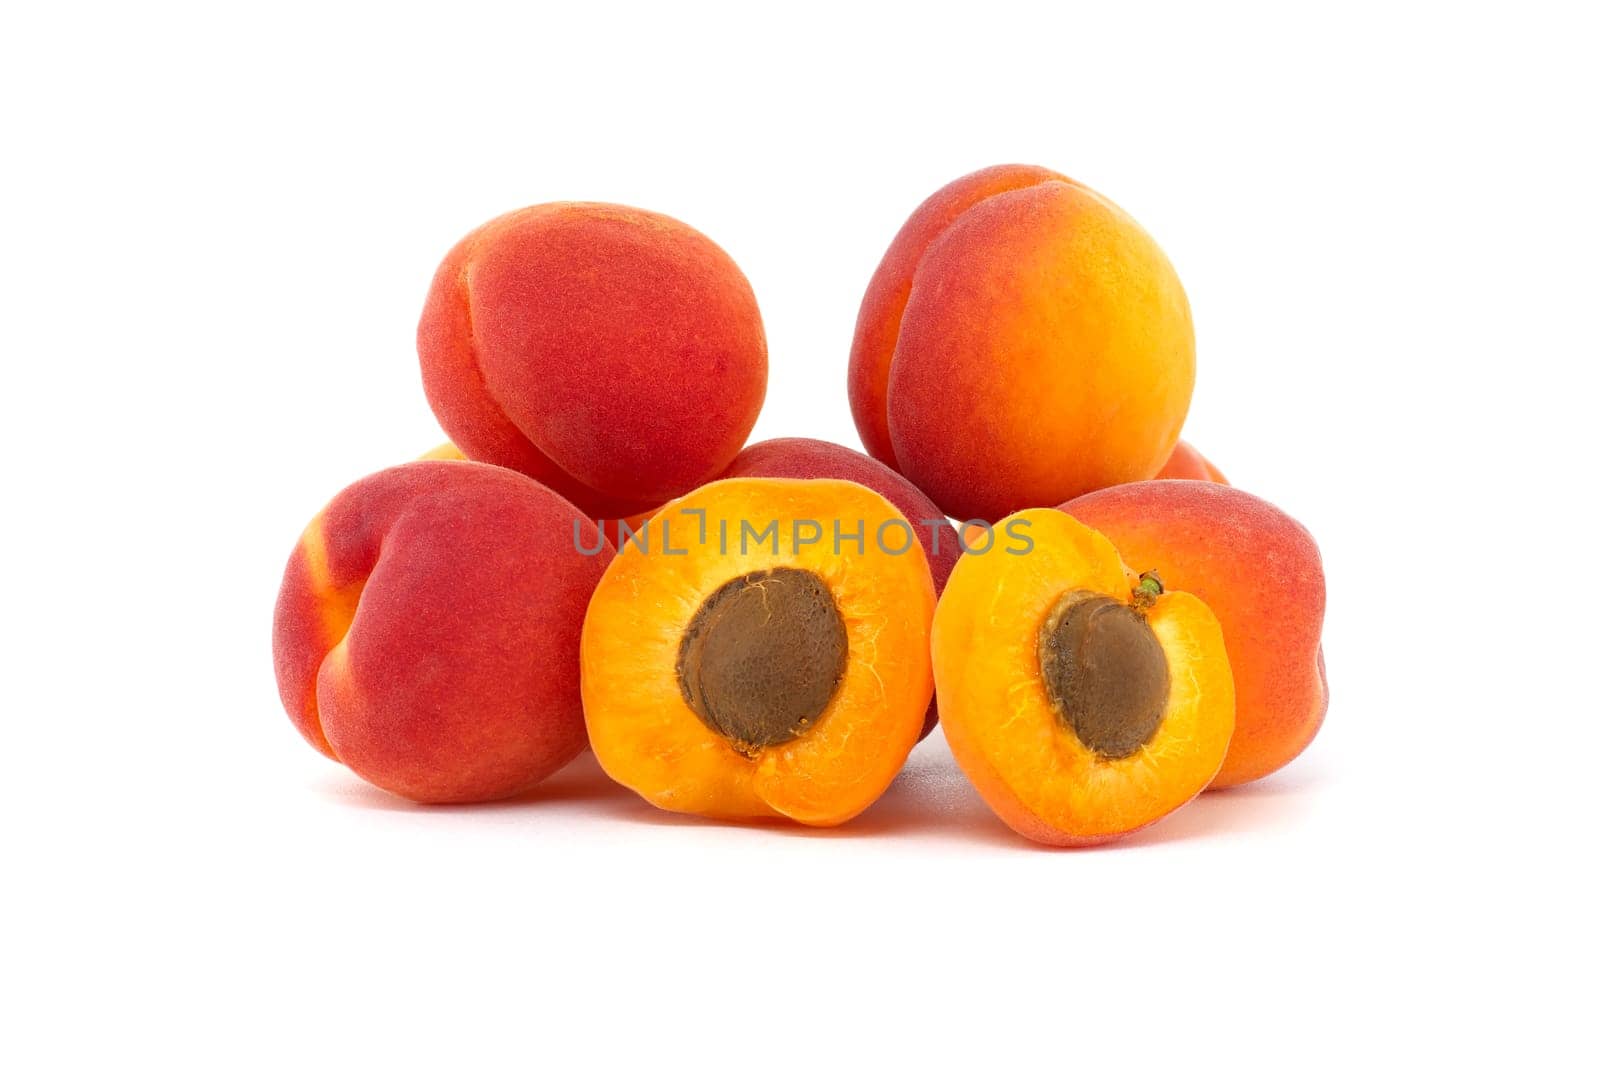 Collection of ripe whole apricots and one cut in half to reveal its interior, isolated on a white background